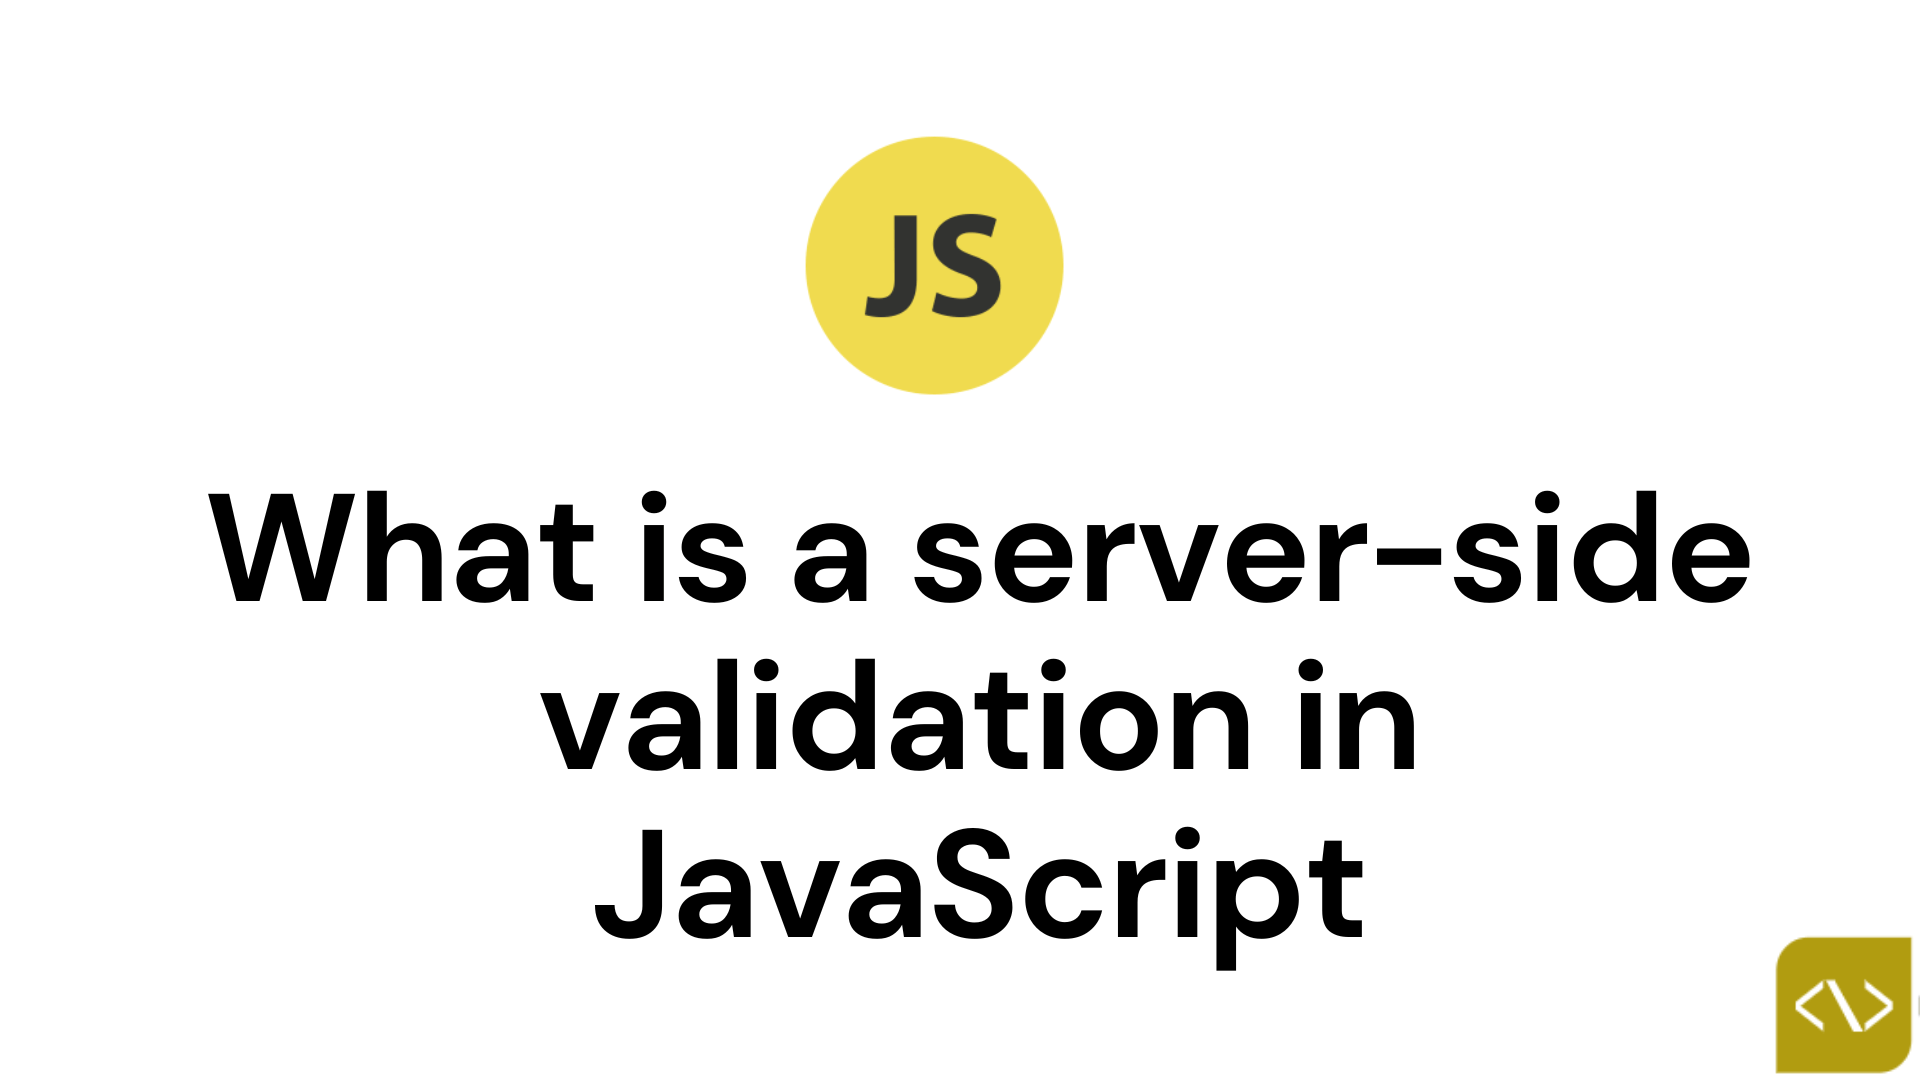 What is a server-side validation in JavaScript?